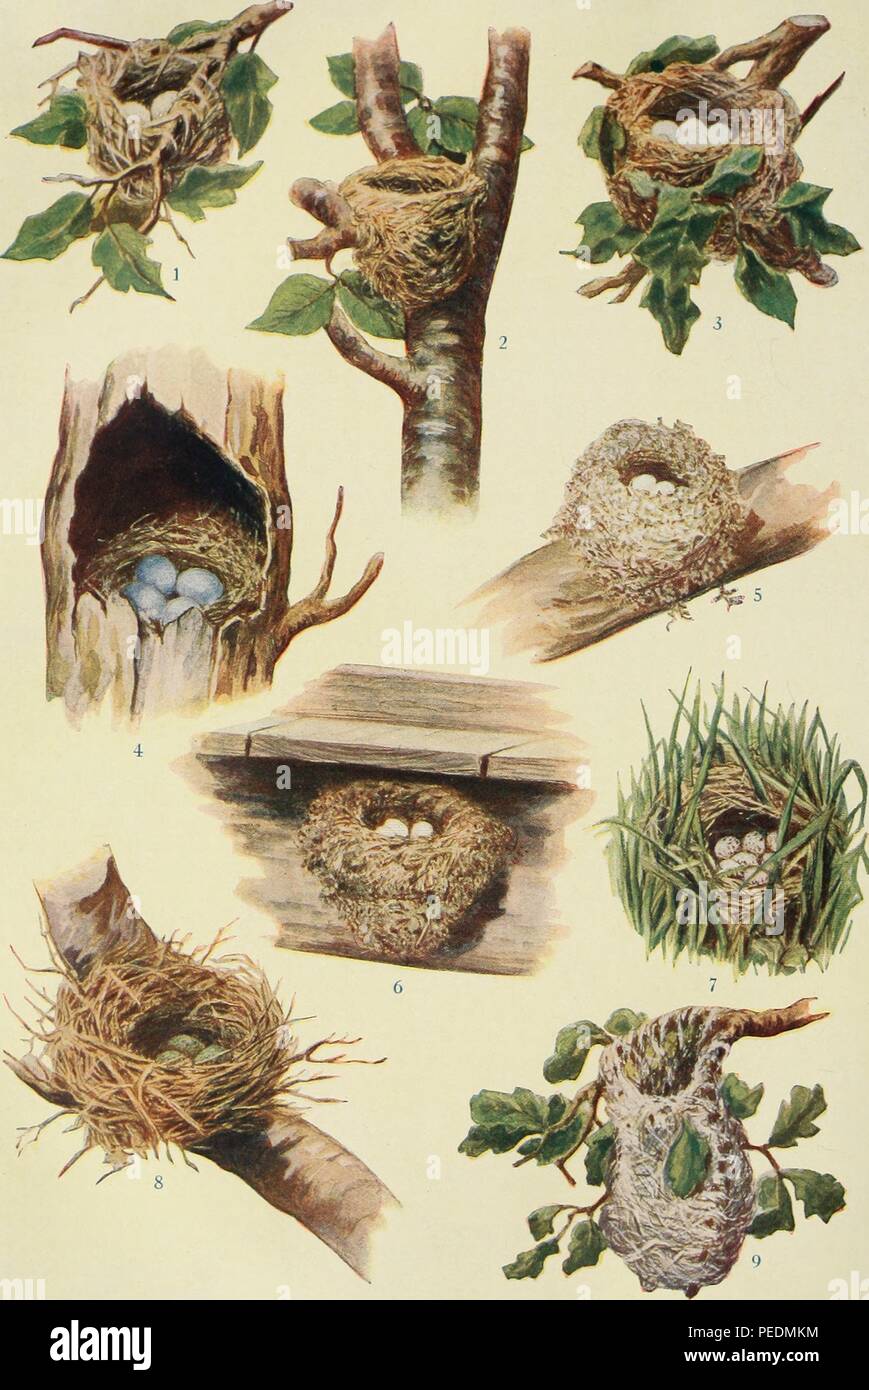 Color illustration of the nests and eggs of nine birds, including the red-eyed vireo (Vireo olivaceus) the American redstart (Setophaga ruticilla) the American goldfinch (Spinus tristis) the bluebird (genus Sialia) the hummingbird (family Trochilidae), the phoebe (genus Sayornis), the meadowlark (genera Sturnella and Leistes), the blue jay (Cyanocitta cristata) and the Baltimore oriole (Icterus galbula), 1919. Courtesy Internet Archive. () Stock Photo